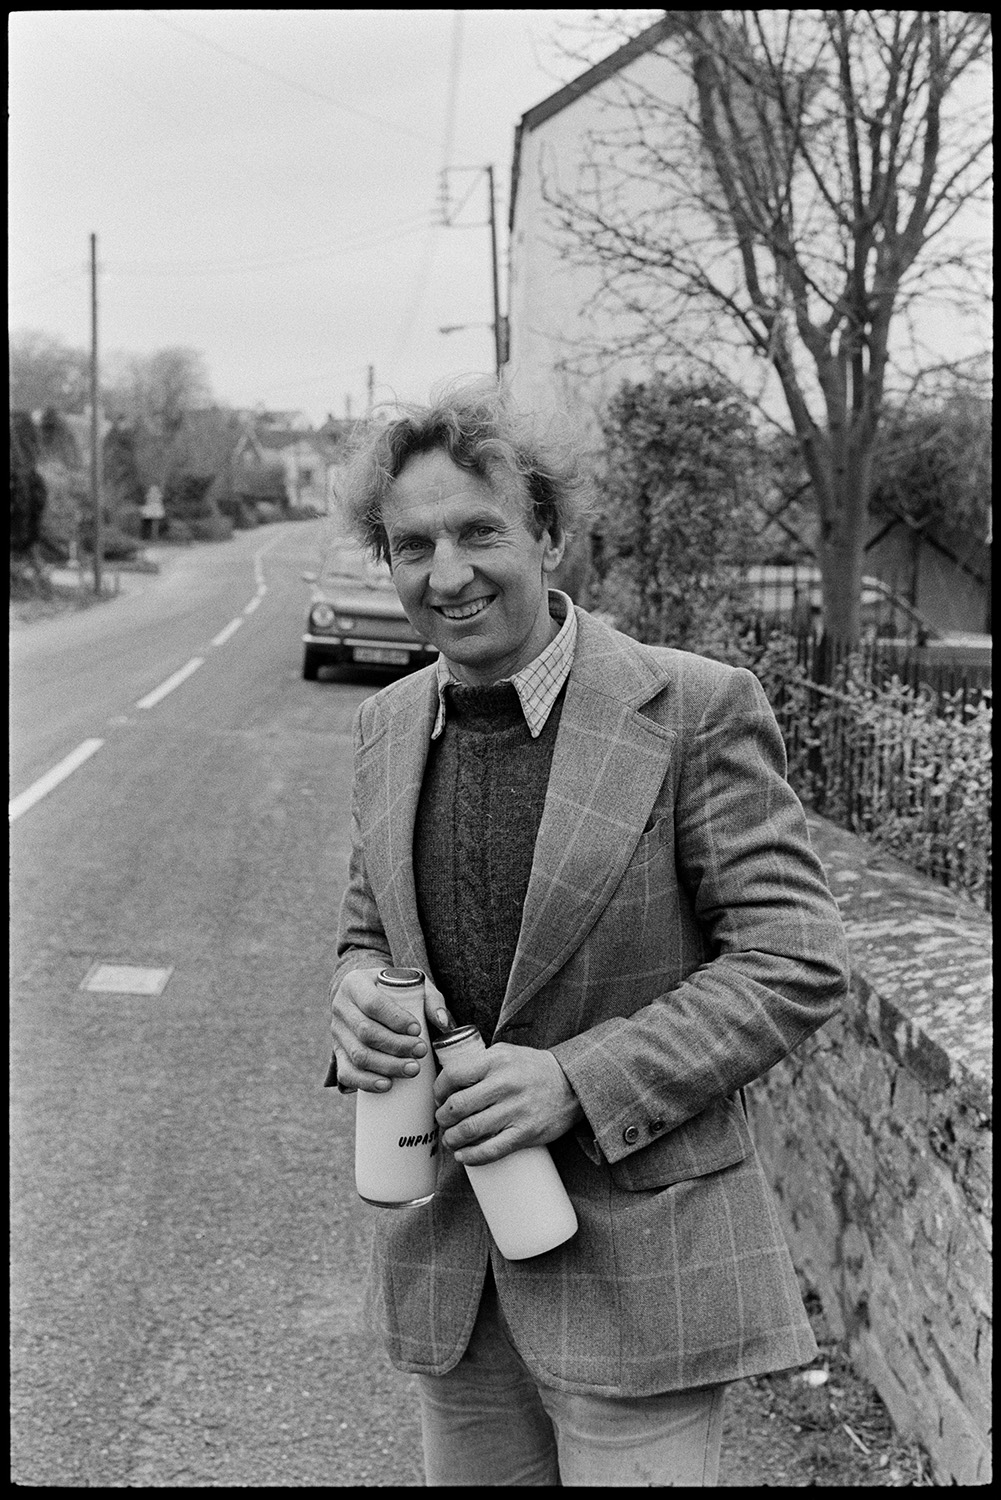 Milkman on last round.
Ivor Bourne standing in road in Beaford holding two full bottles of milk on his last milk delivery round in the village.]